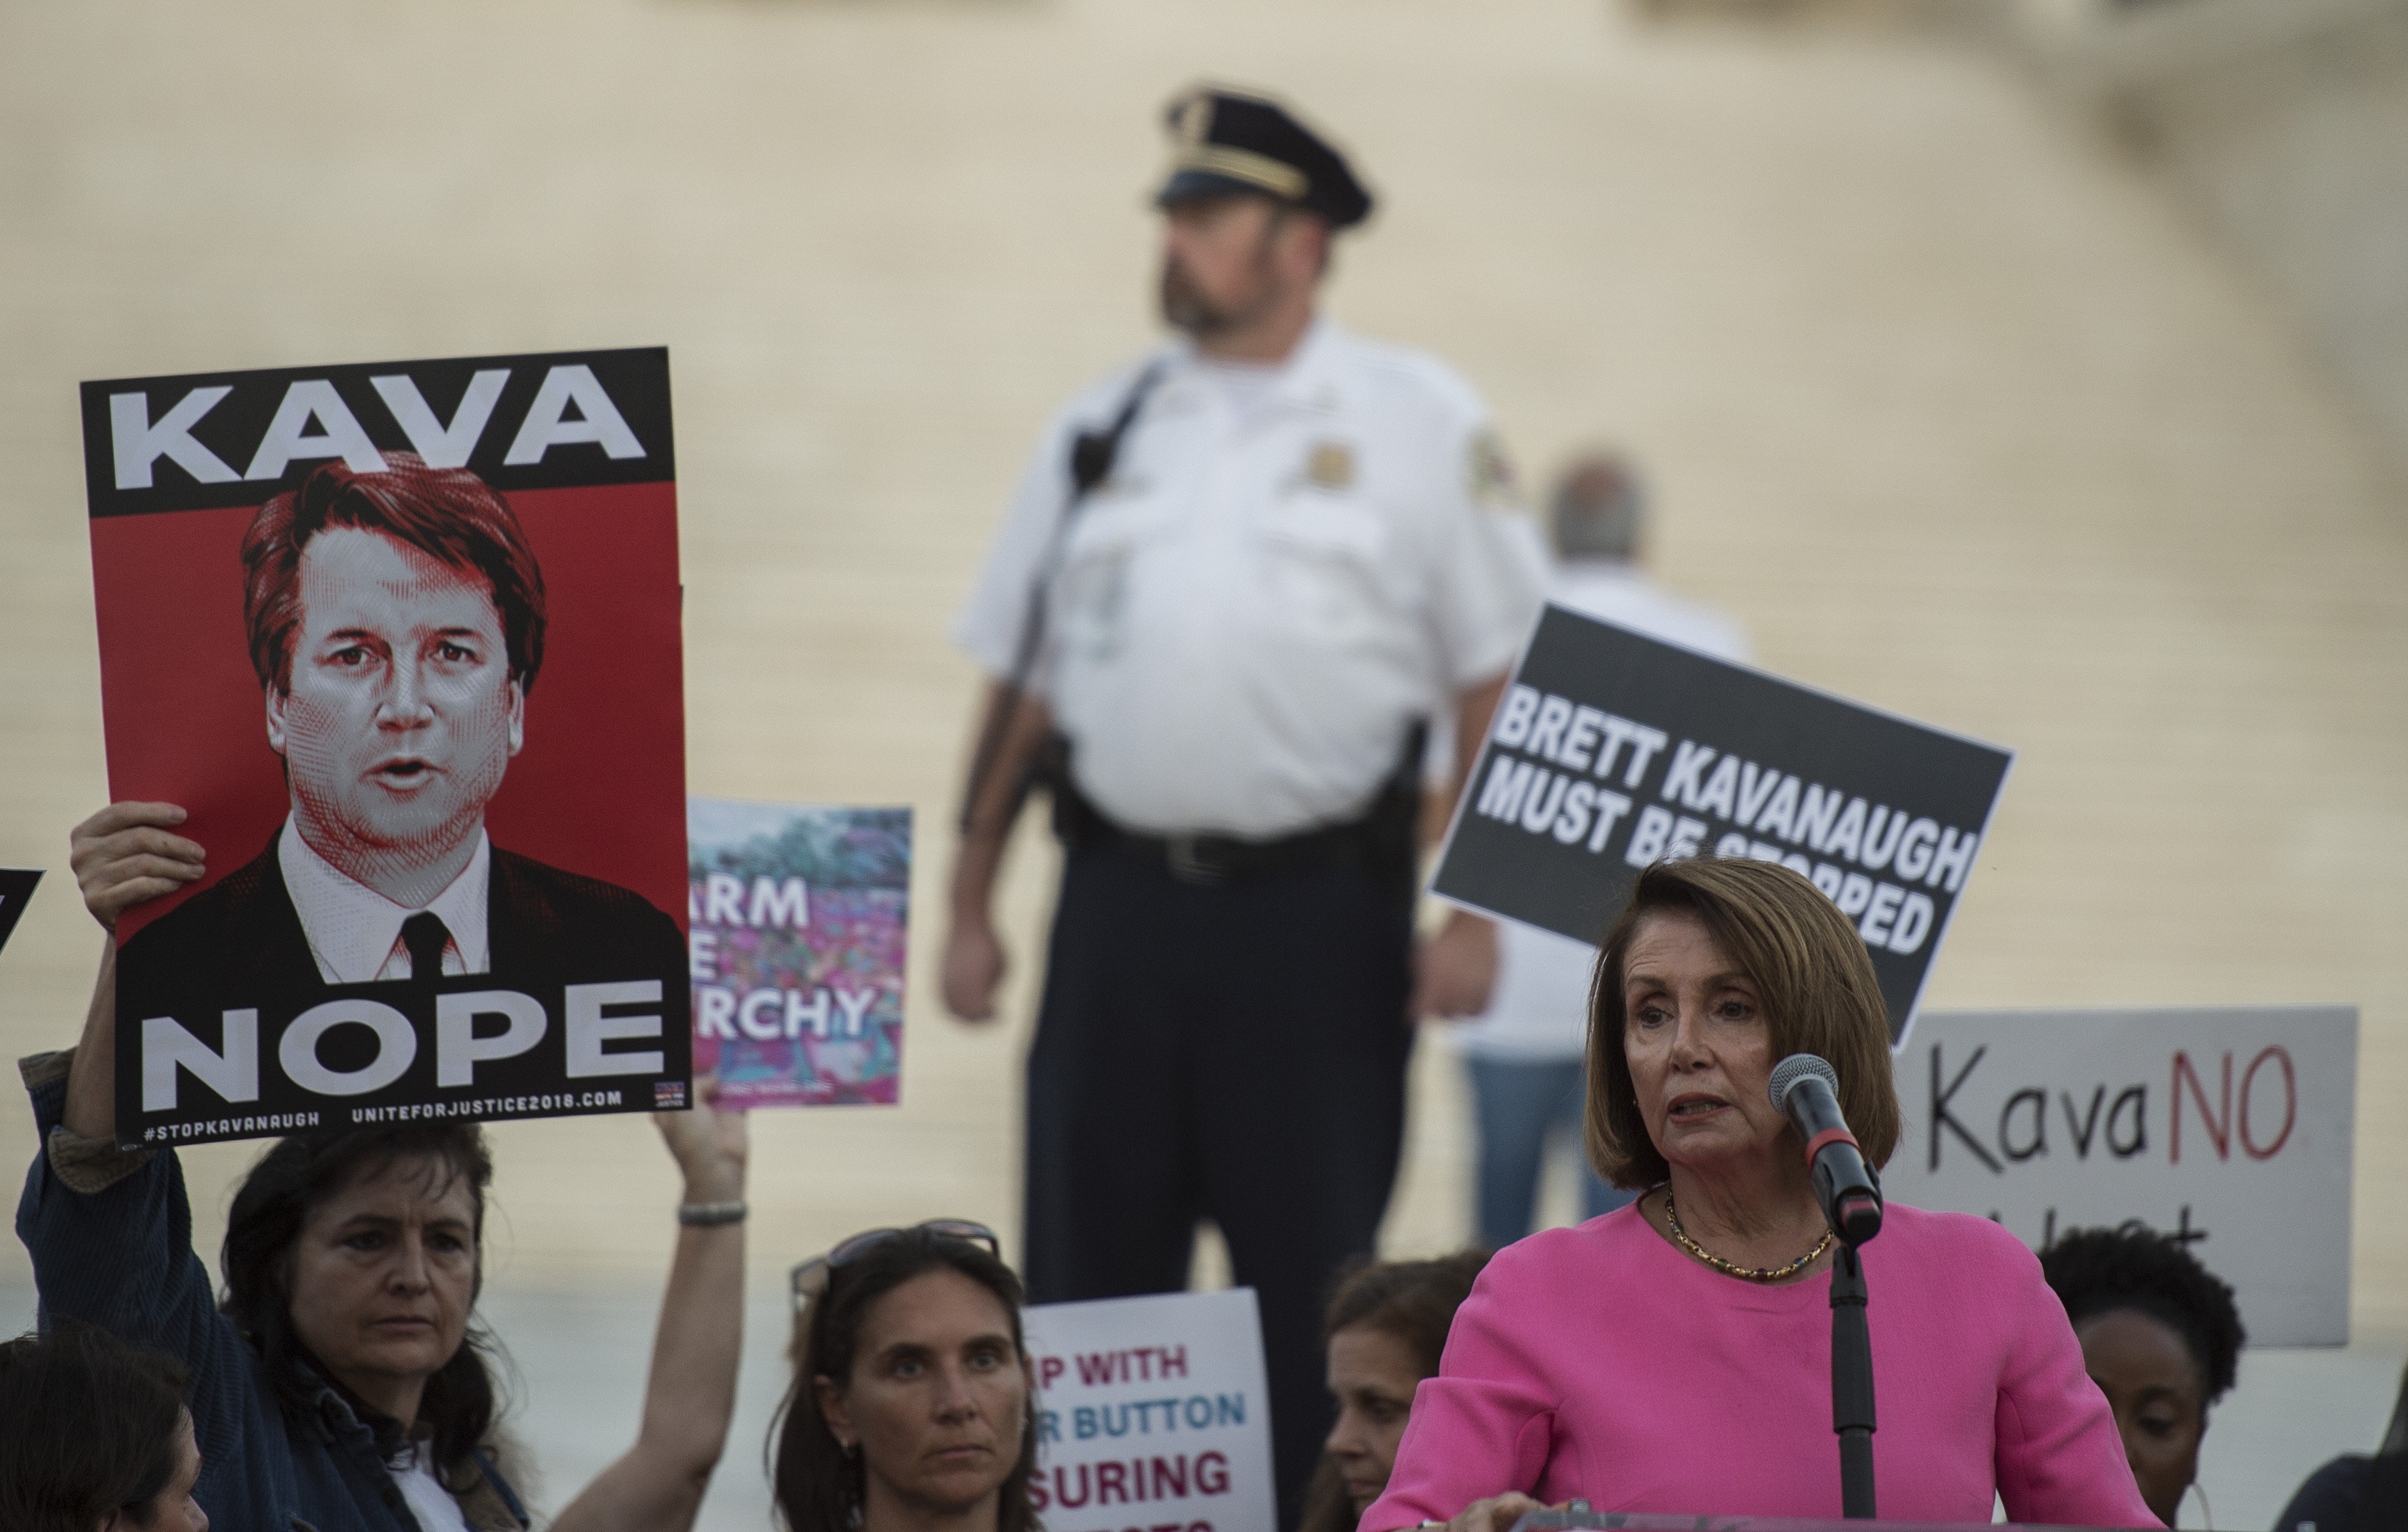 US House Minority leader Nancy Pelosi speaks to activists during a protest against US Supreme Court nominee Brett Kavanaugh in Washington, DC, on October 3, 2018. (Photo by ANDREW CABALLERO-REYNOLDS / AFP) (Photo credit should read ANDREW CABALLERO-REYNOLDS/AFP via Getty Images)